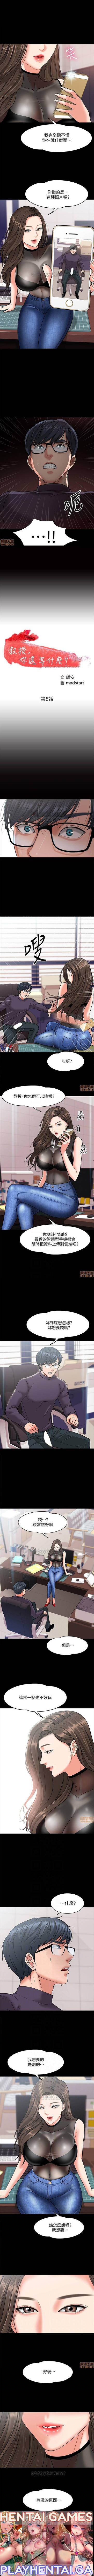 Blowing PROFESSOR, ARE YOU JUST GOING TO LOOK AT ME? | DESIRE SWAMP | 教授，你還等什麼? Ch. 5 [Chinese] Manhwa Tranny Sex - Picture 2